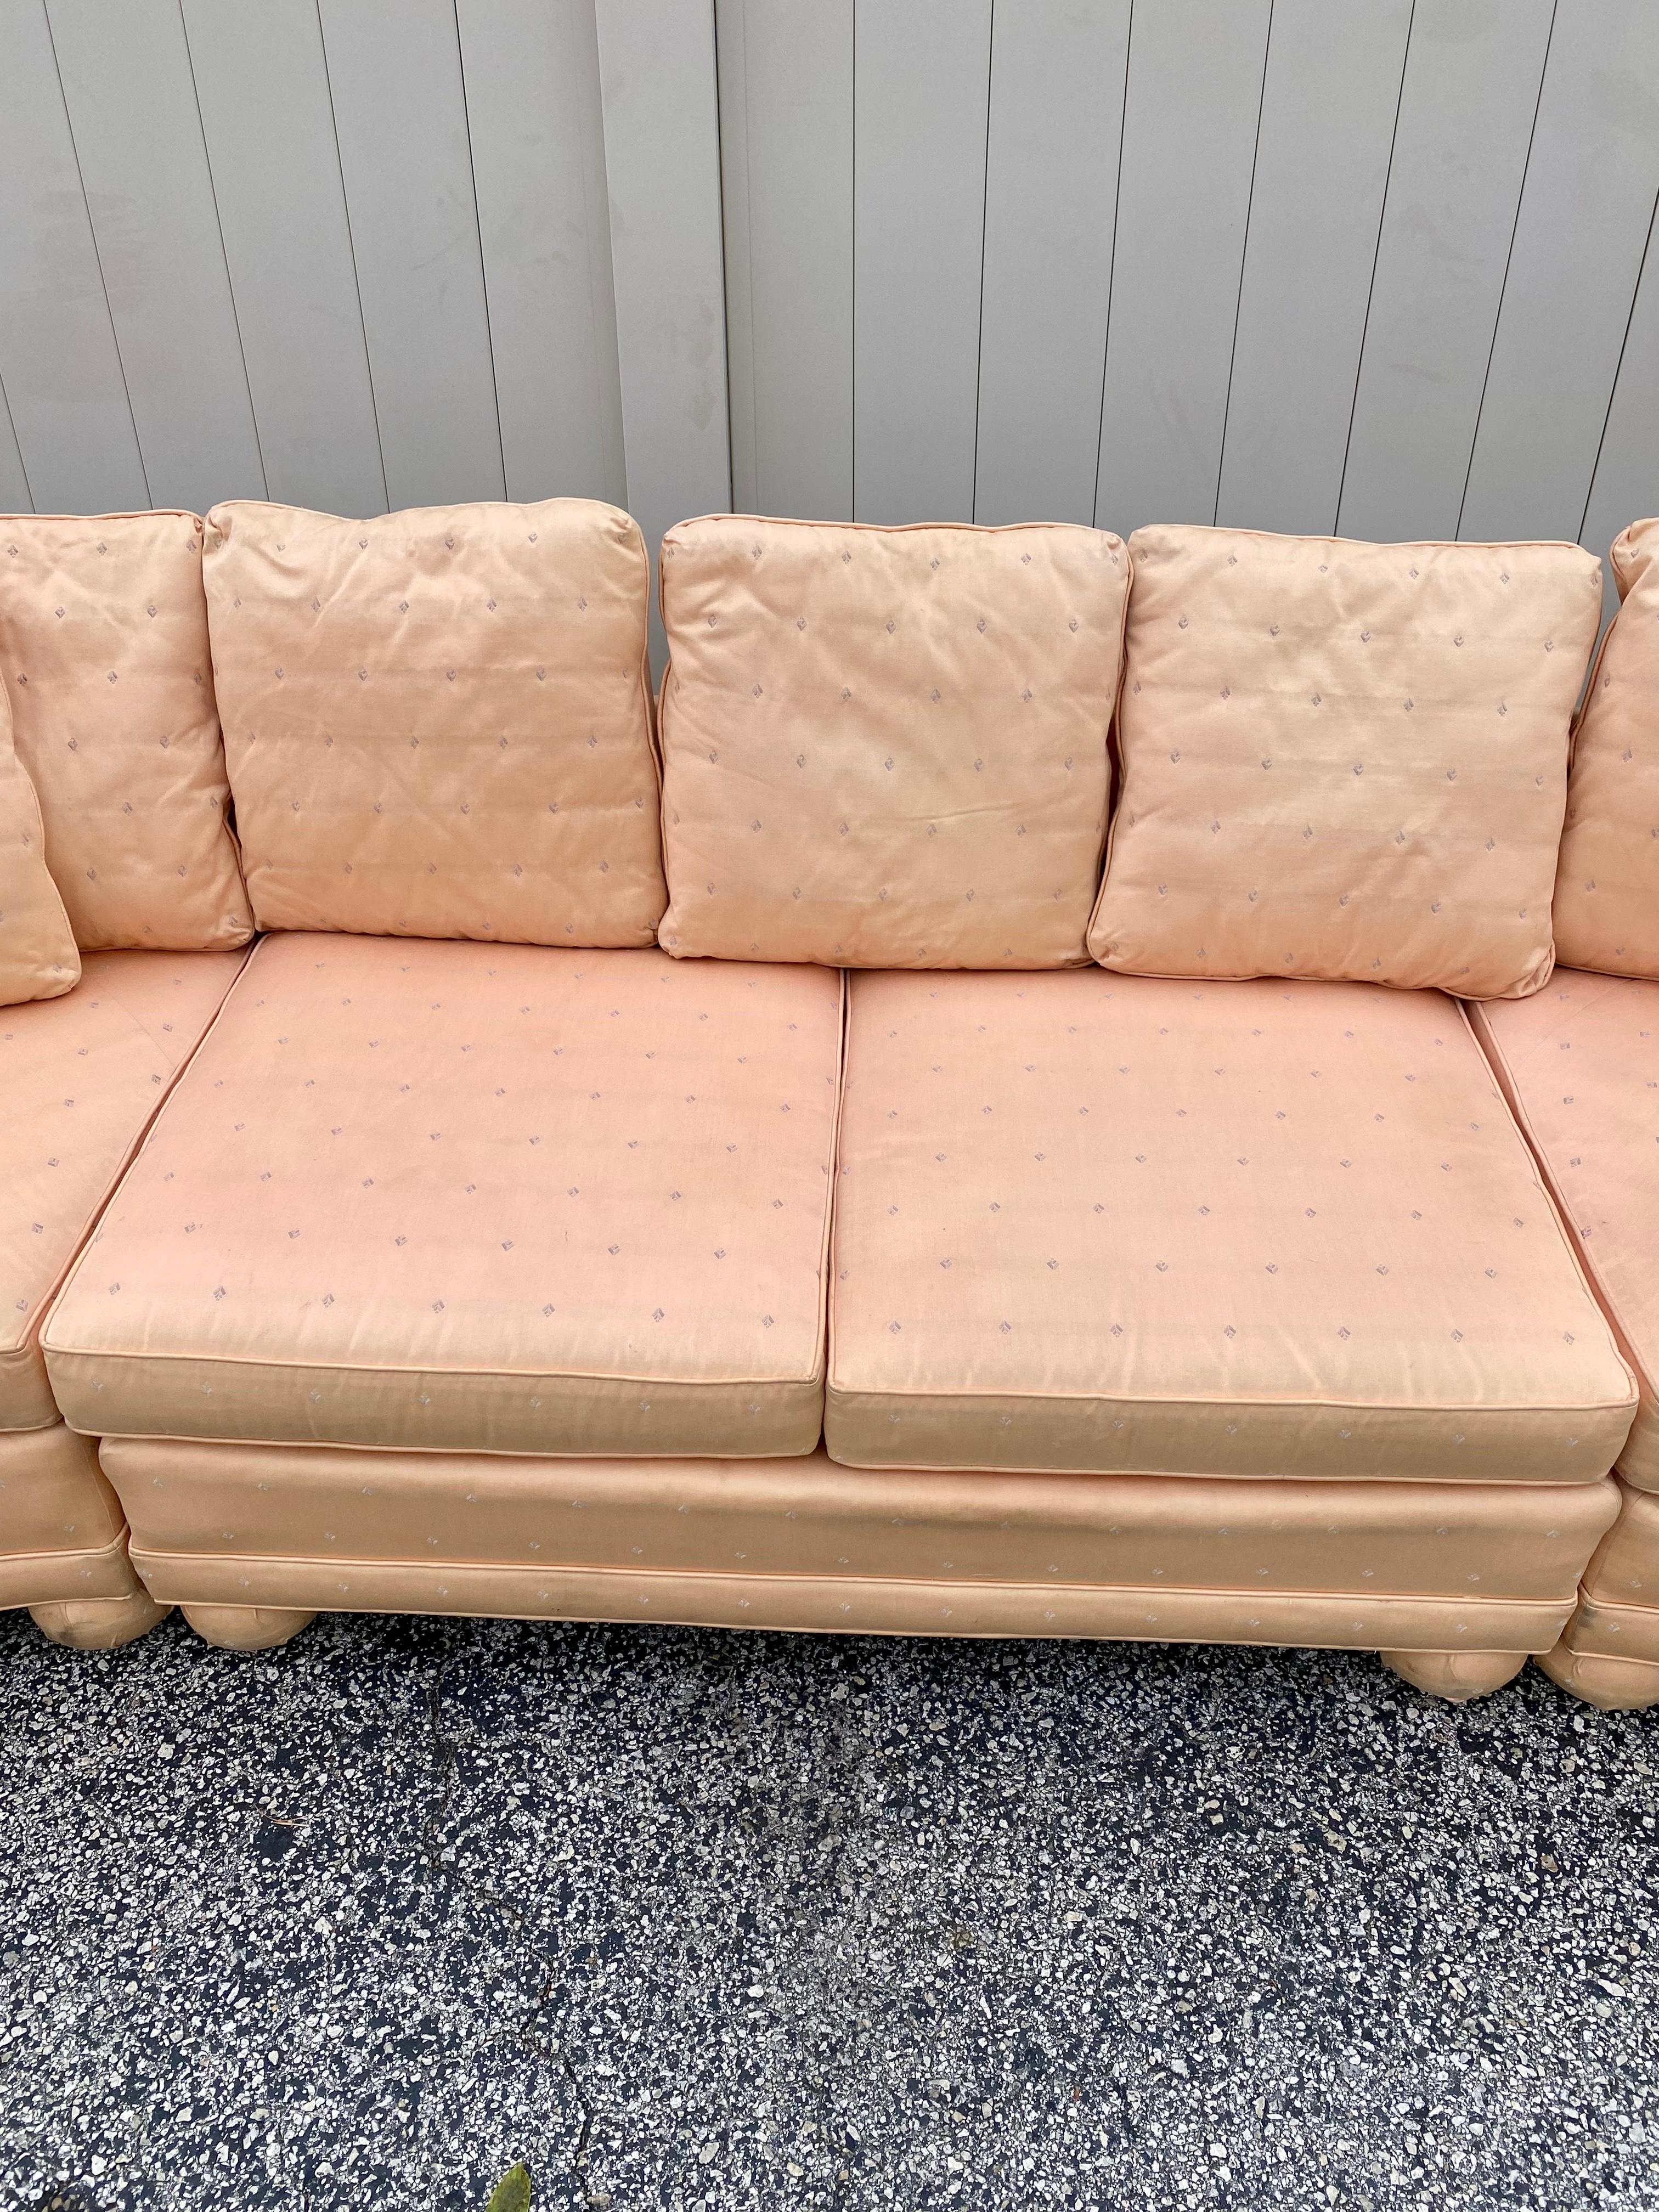 1970s Milo Baughman Salmon Satin Curved Sectional In Good Condition For Sale In Fort Lauderdale, FL